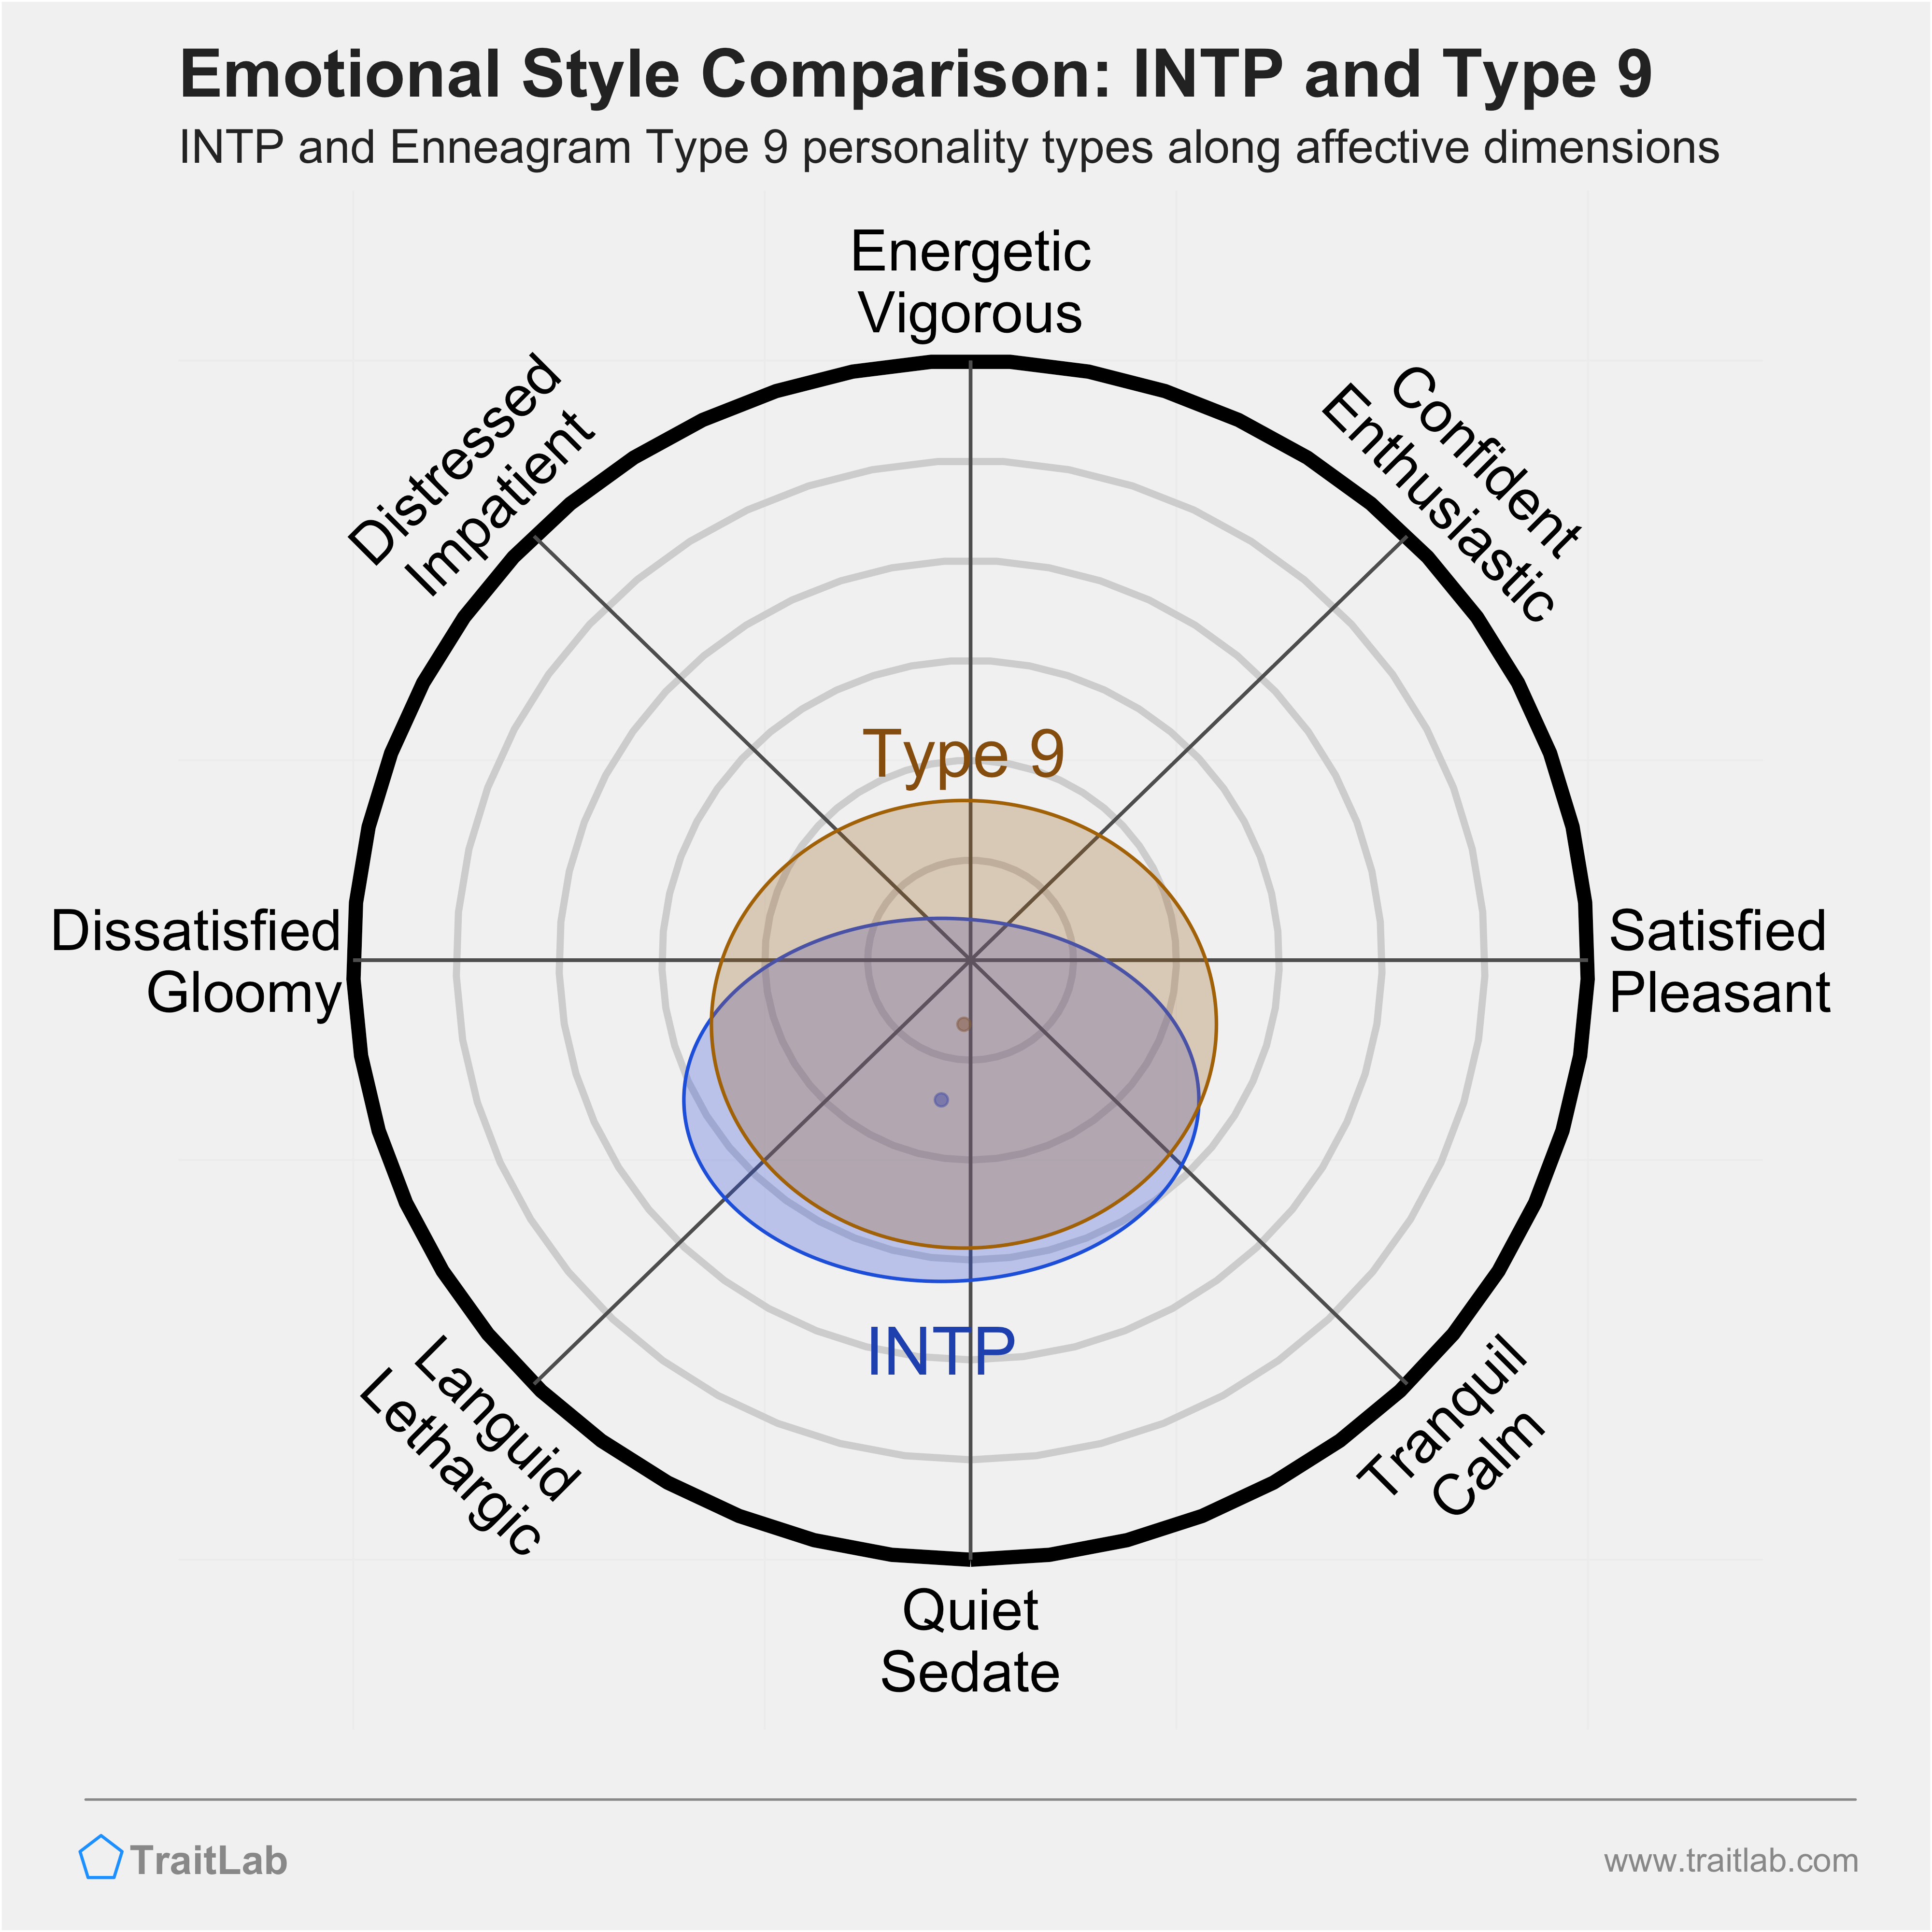 INTP and Type 9 comparison across emotional (affective) dimensions